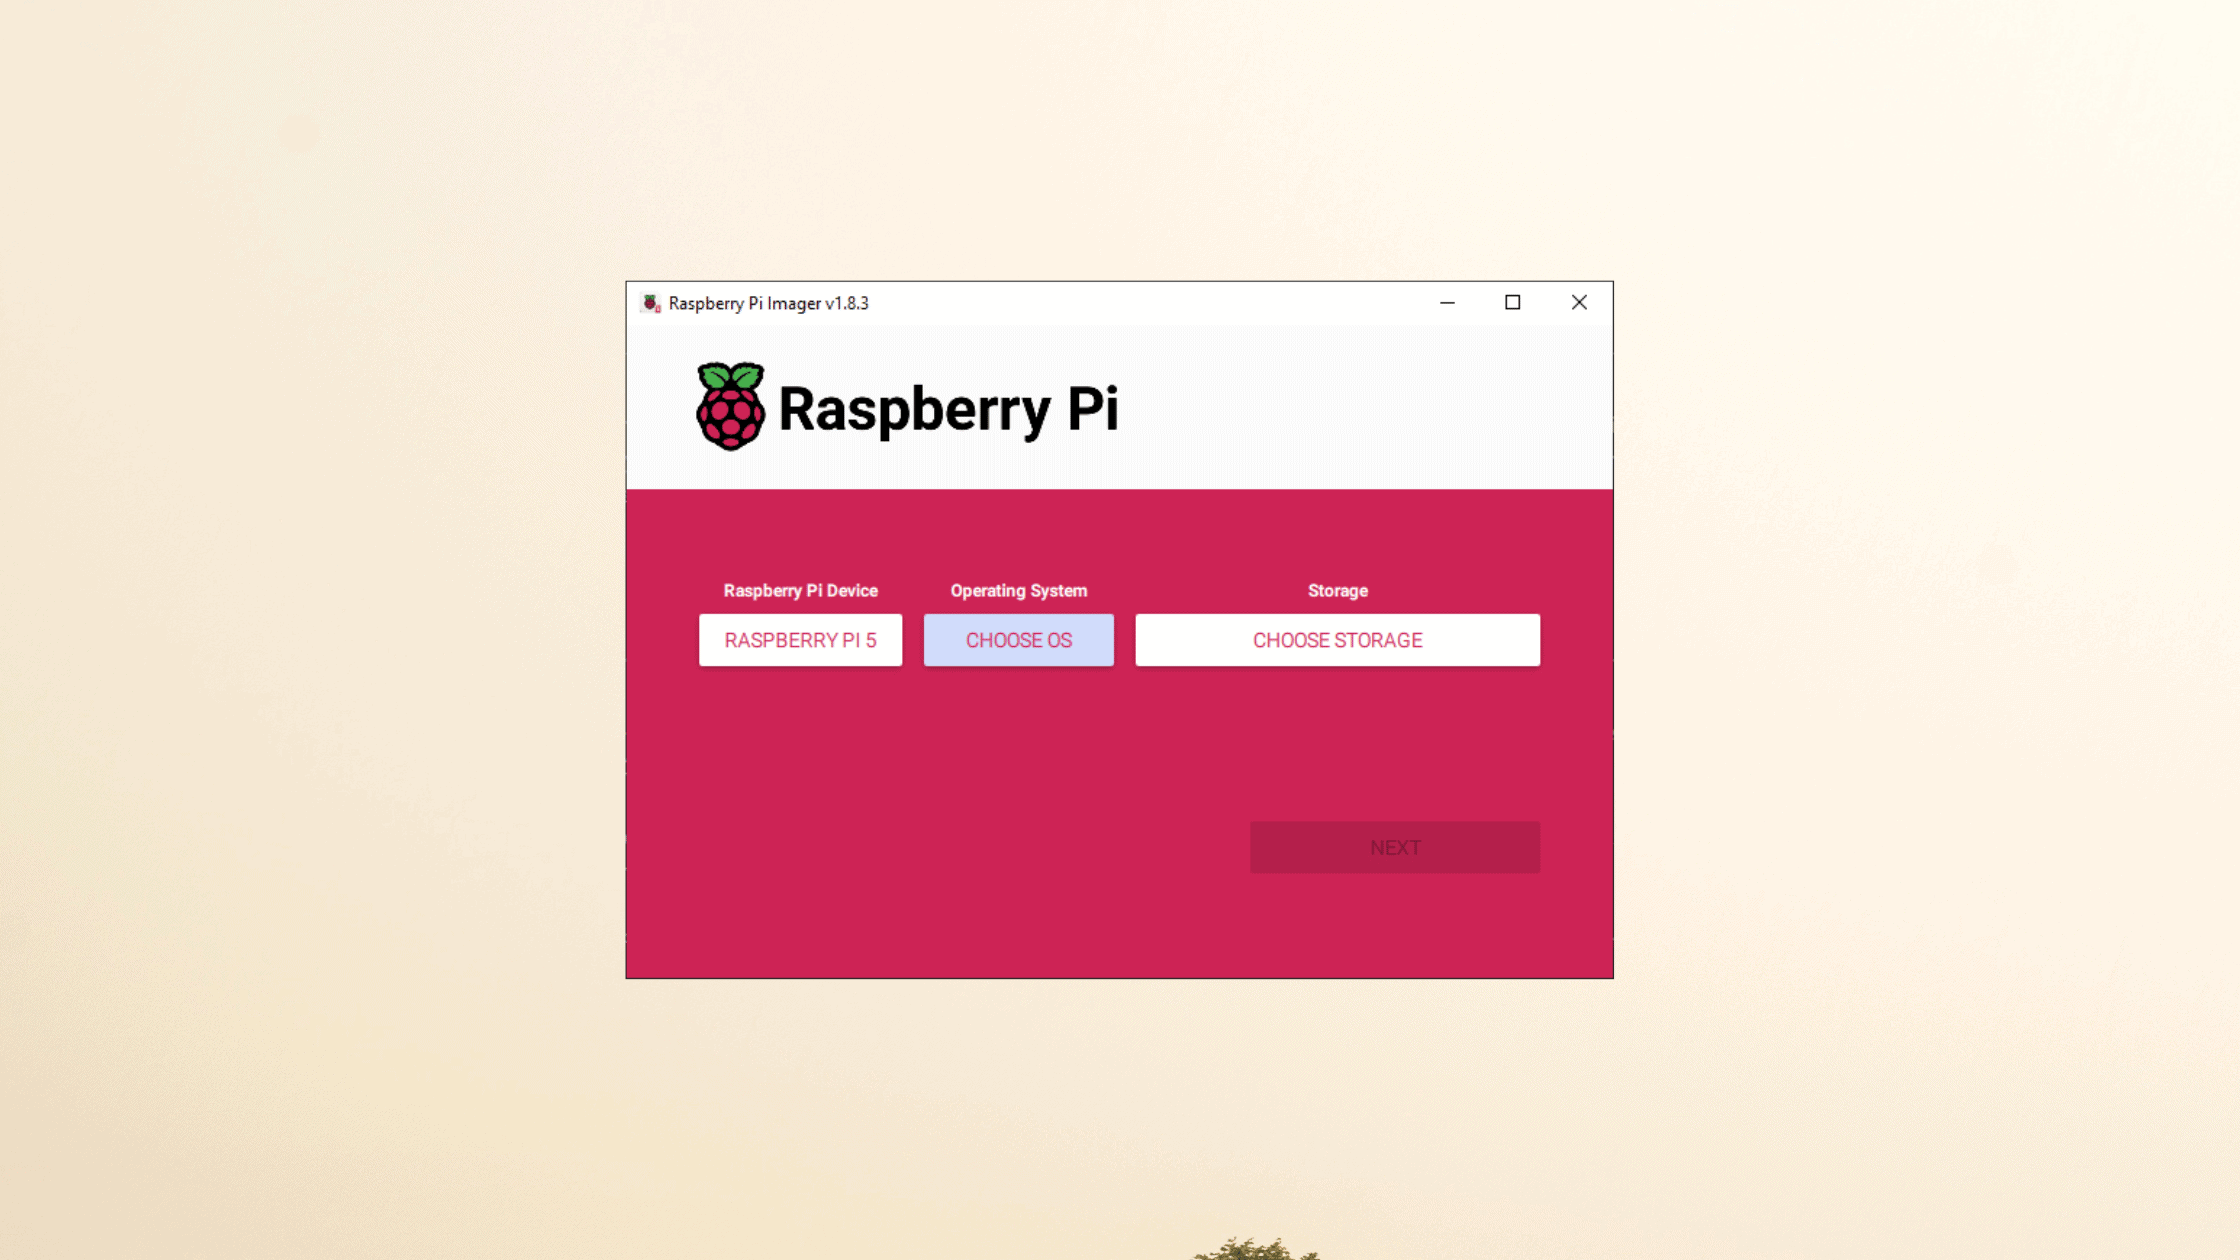 What Are The New Features Added To Raspberry Pi Imager 1 8 1 And Above